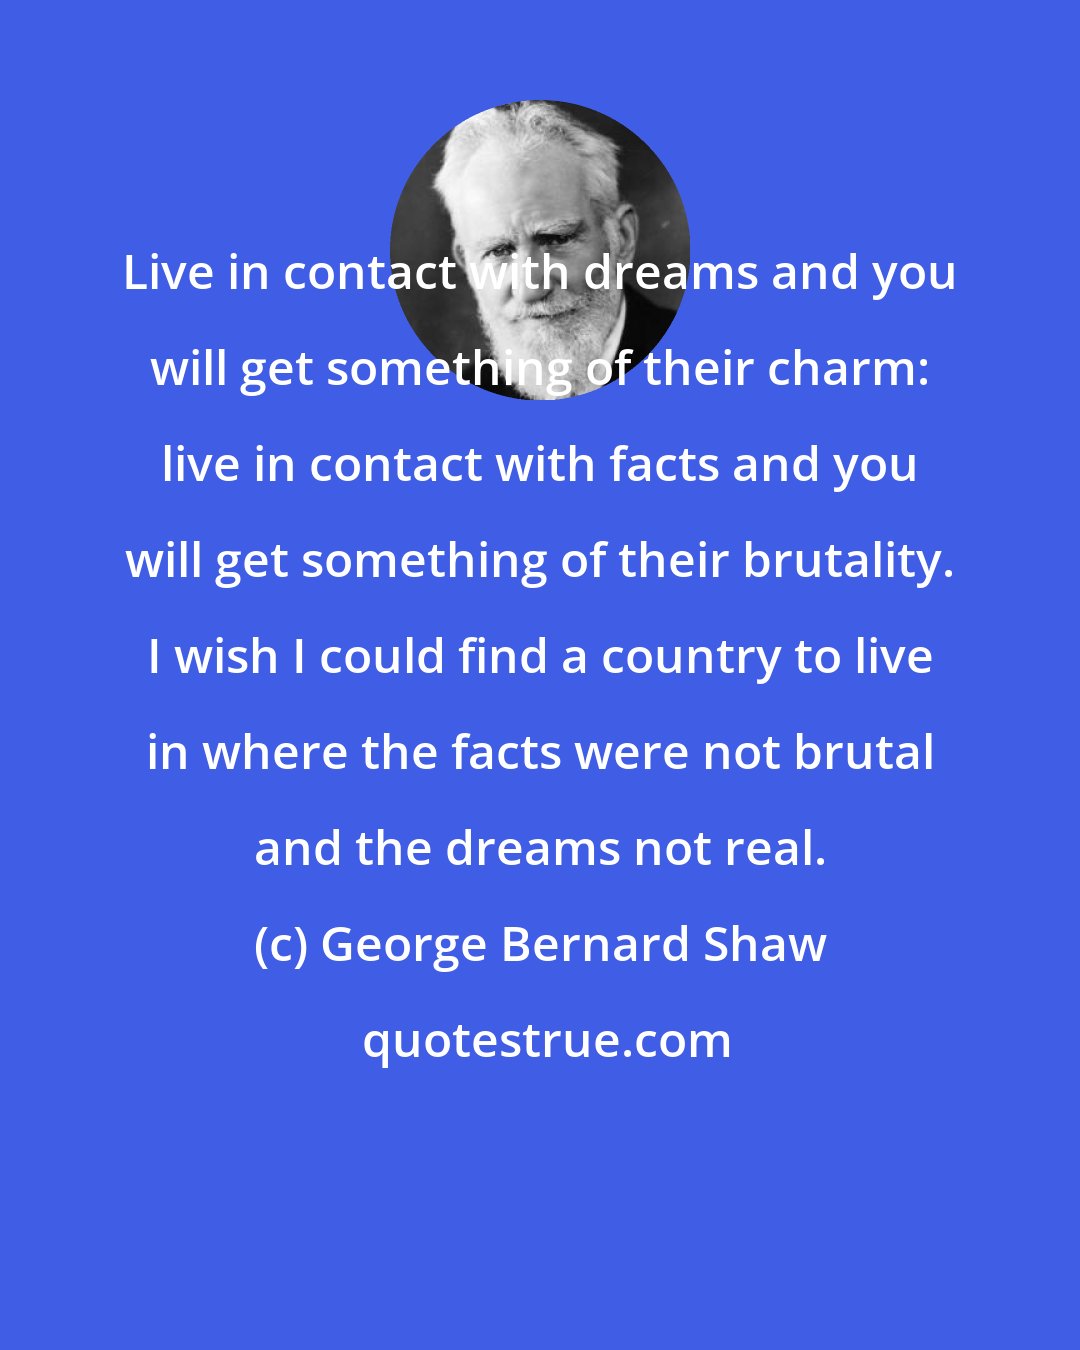 George Bernard Shaw: Live in contact with dreams and you will get something of their charm: live in contact with facts and you will get something of their brutality. I wish I could find a country to live in where the facts were not brutal and the dreams not real.